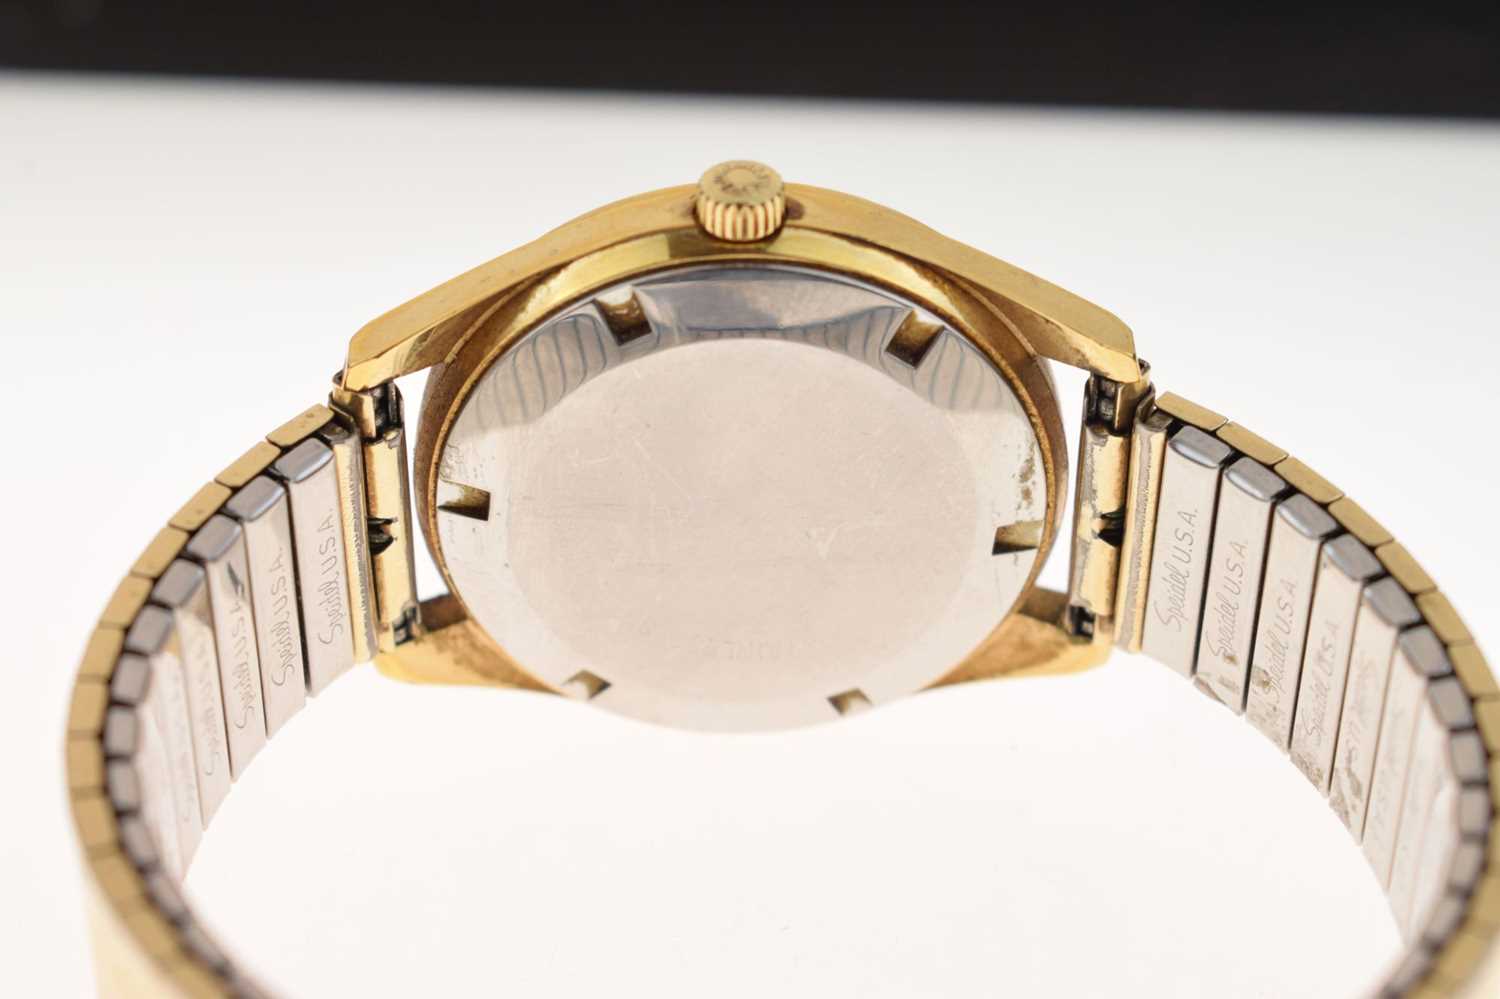 Longines - Gentleman's gold plated automatic bracelet watch - Image 6 of 8